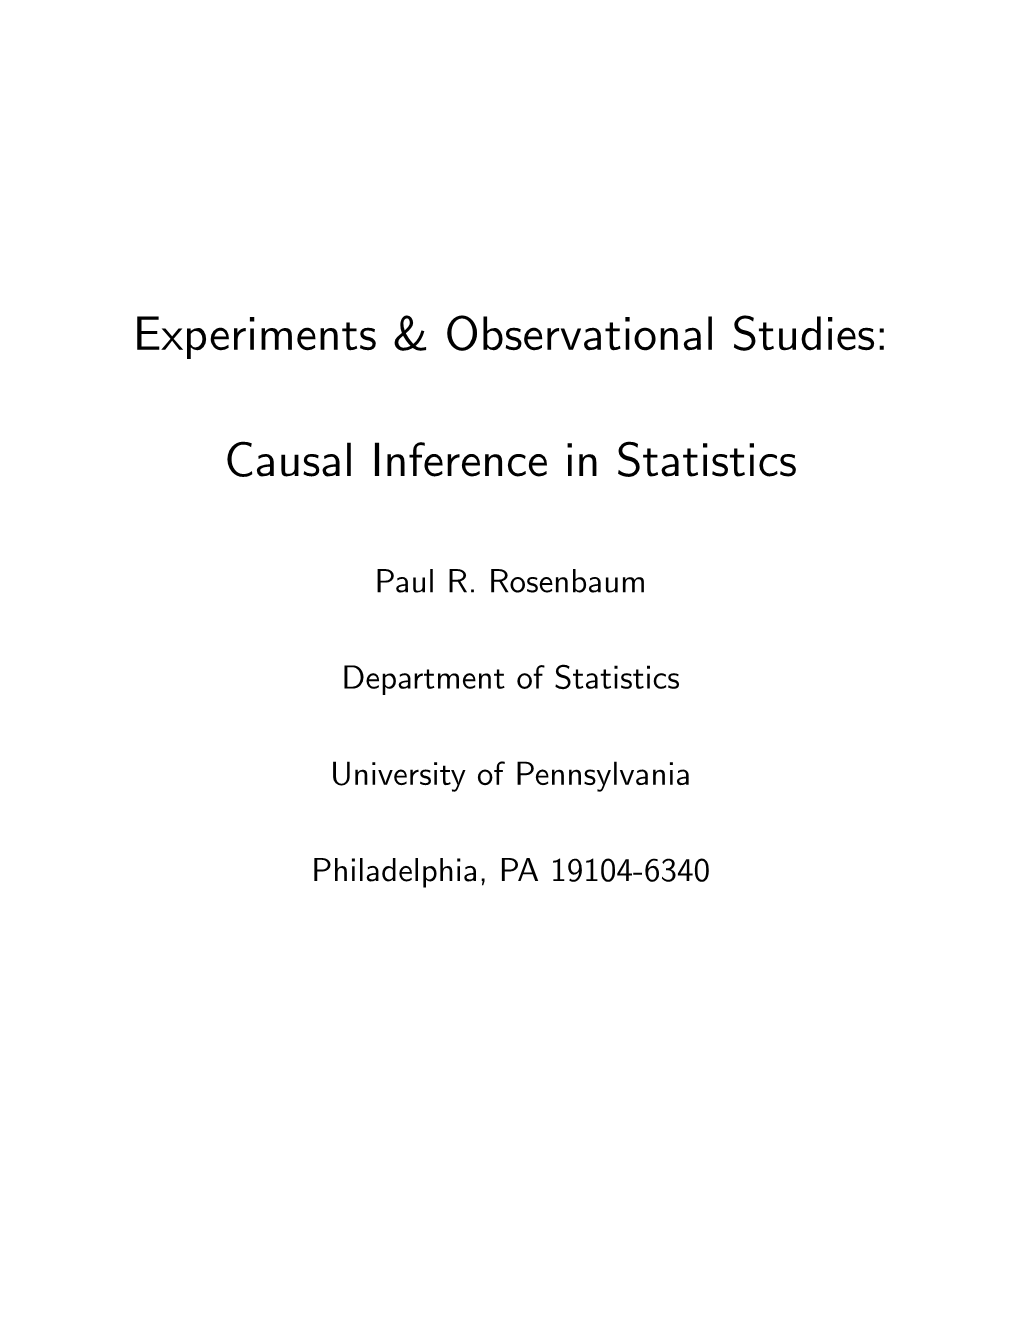 Experiments & Observational Studies: Causal Inference in Statistics